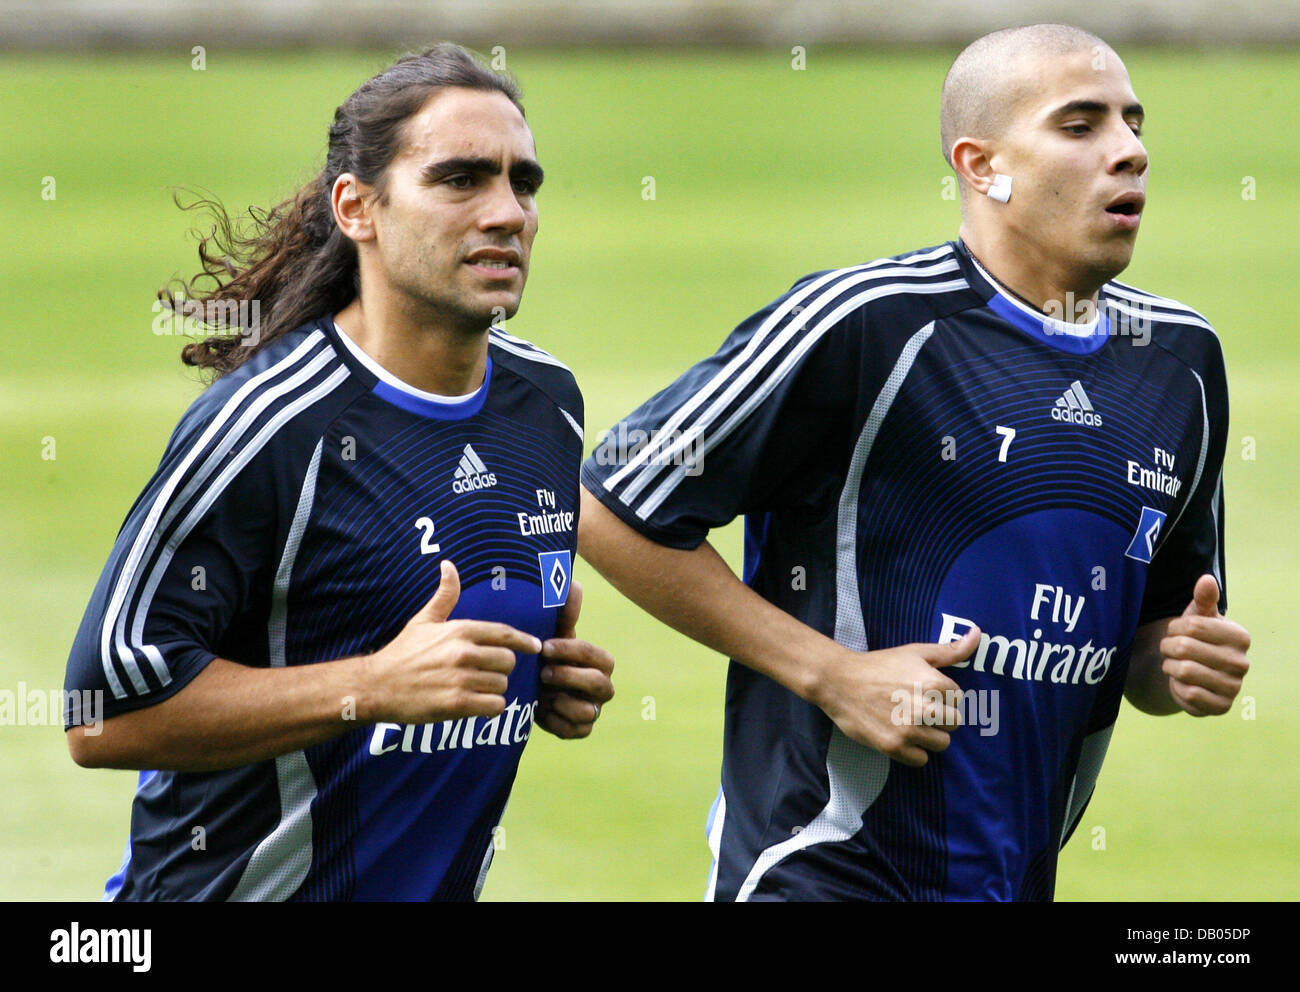 SV Hamburg's Mohamed Zidan (R) and Juan Pablo Sorin warm up at a public training session in Hamburg, Germany, 2 July 2007. SV Hamburg starts its training camp in Austria on July 9th. Photo: Maurizio Gambarini Stock Photo